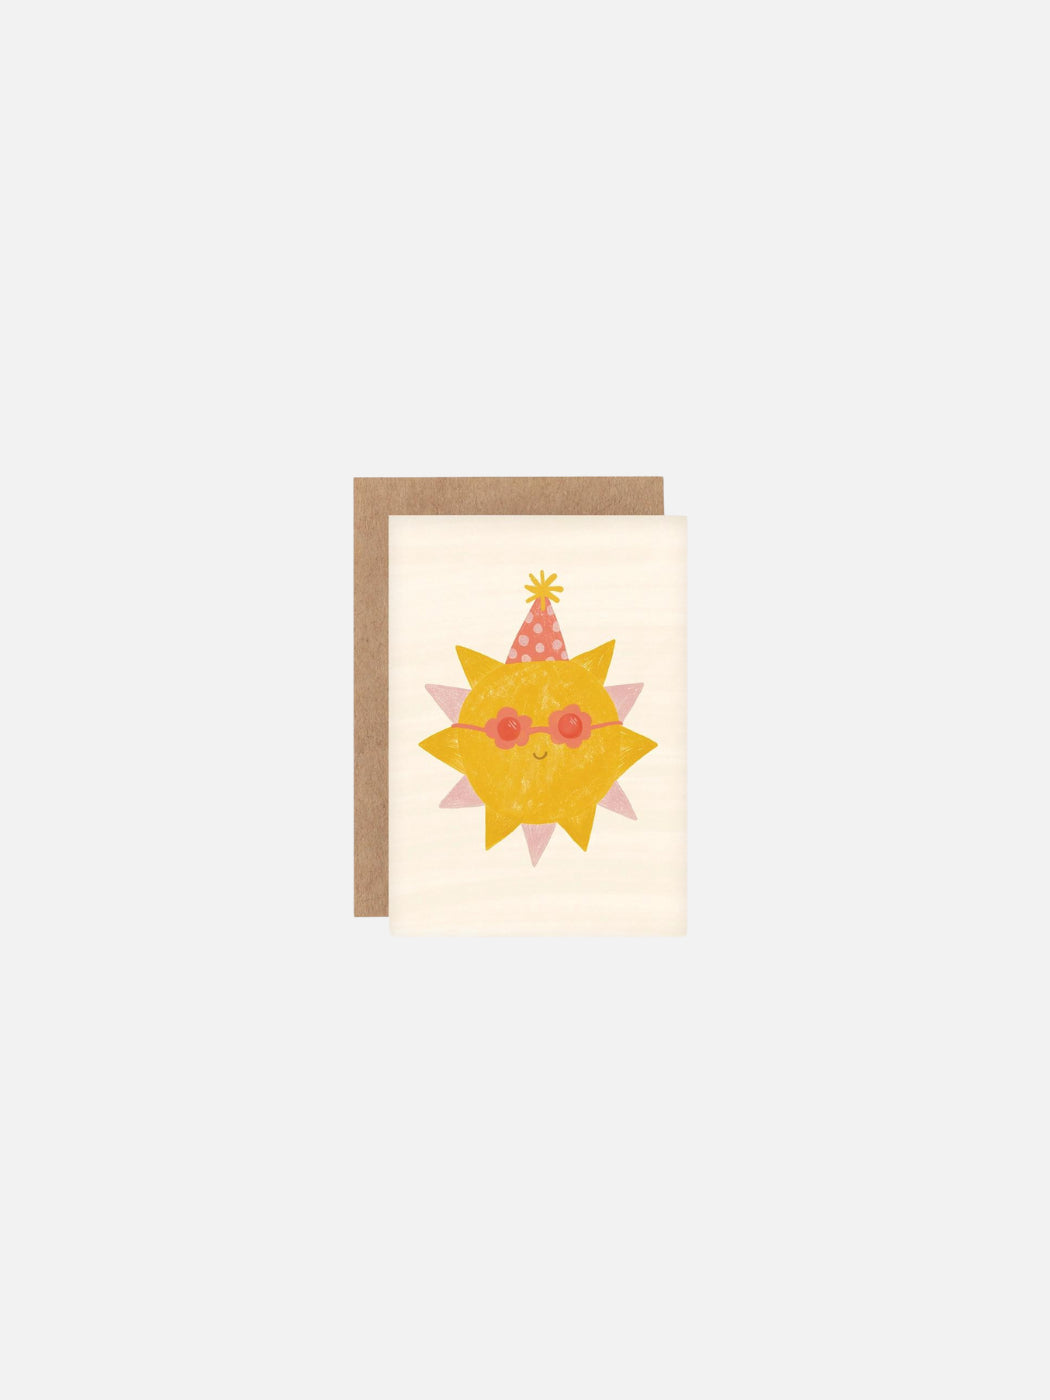 A mini greeting card with an illustration of a sun wearing sunglasses and a party hat